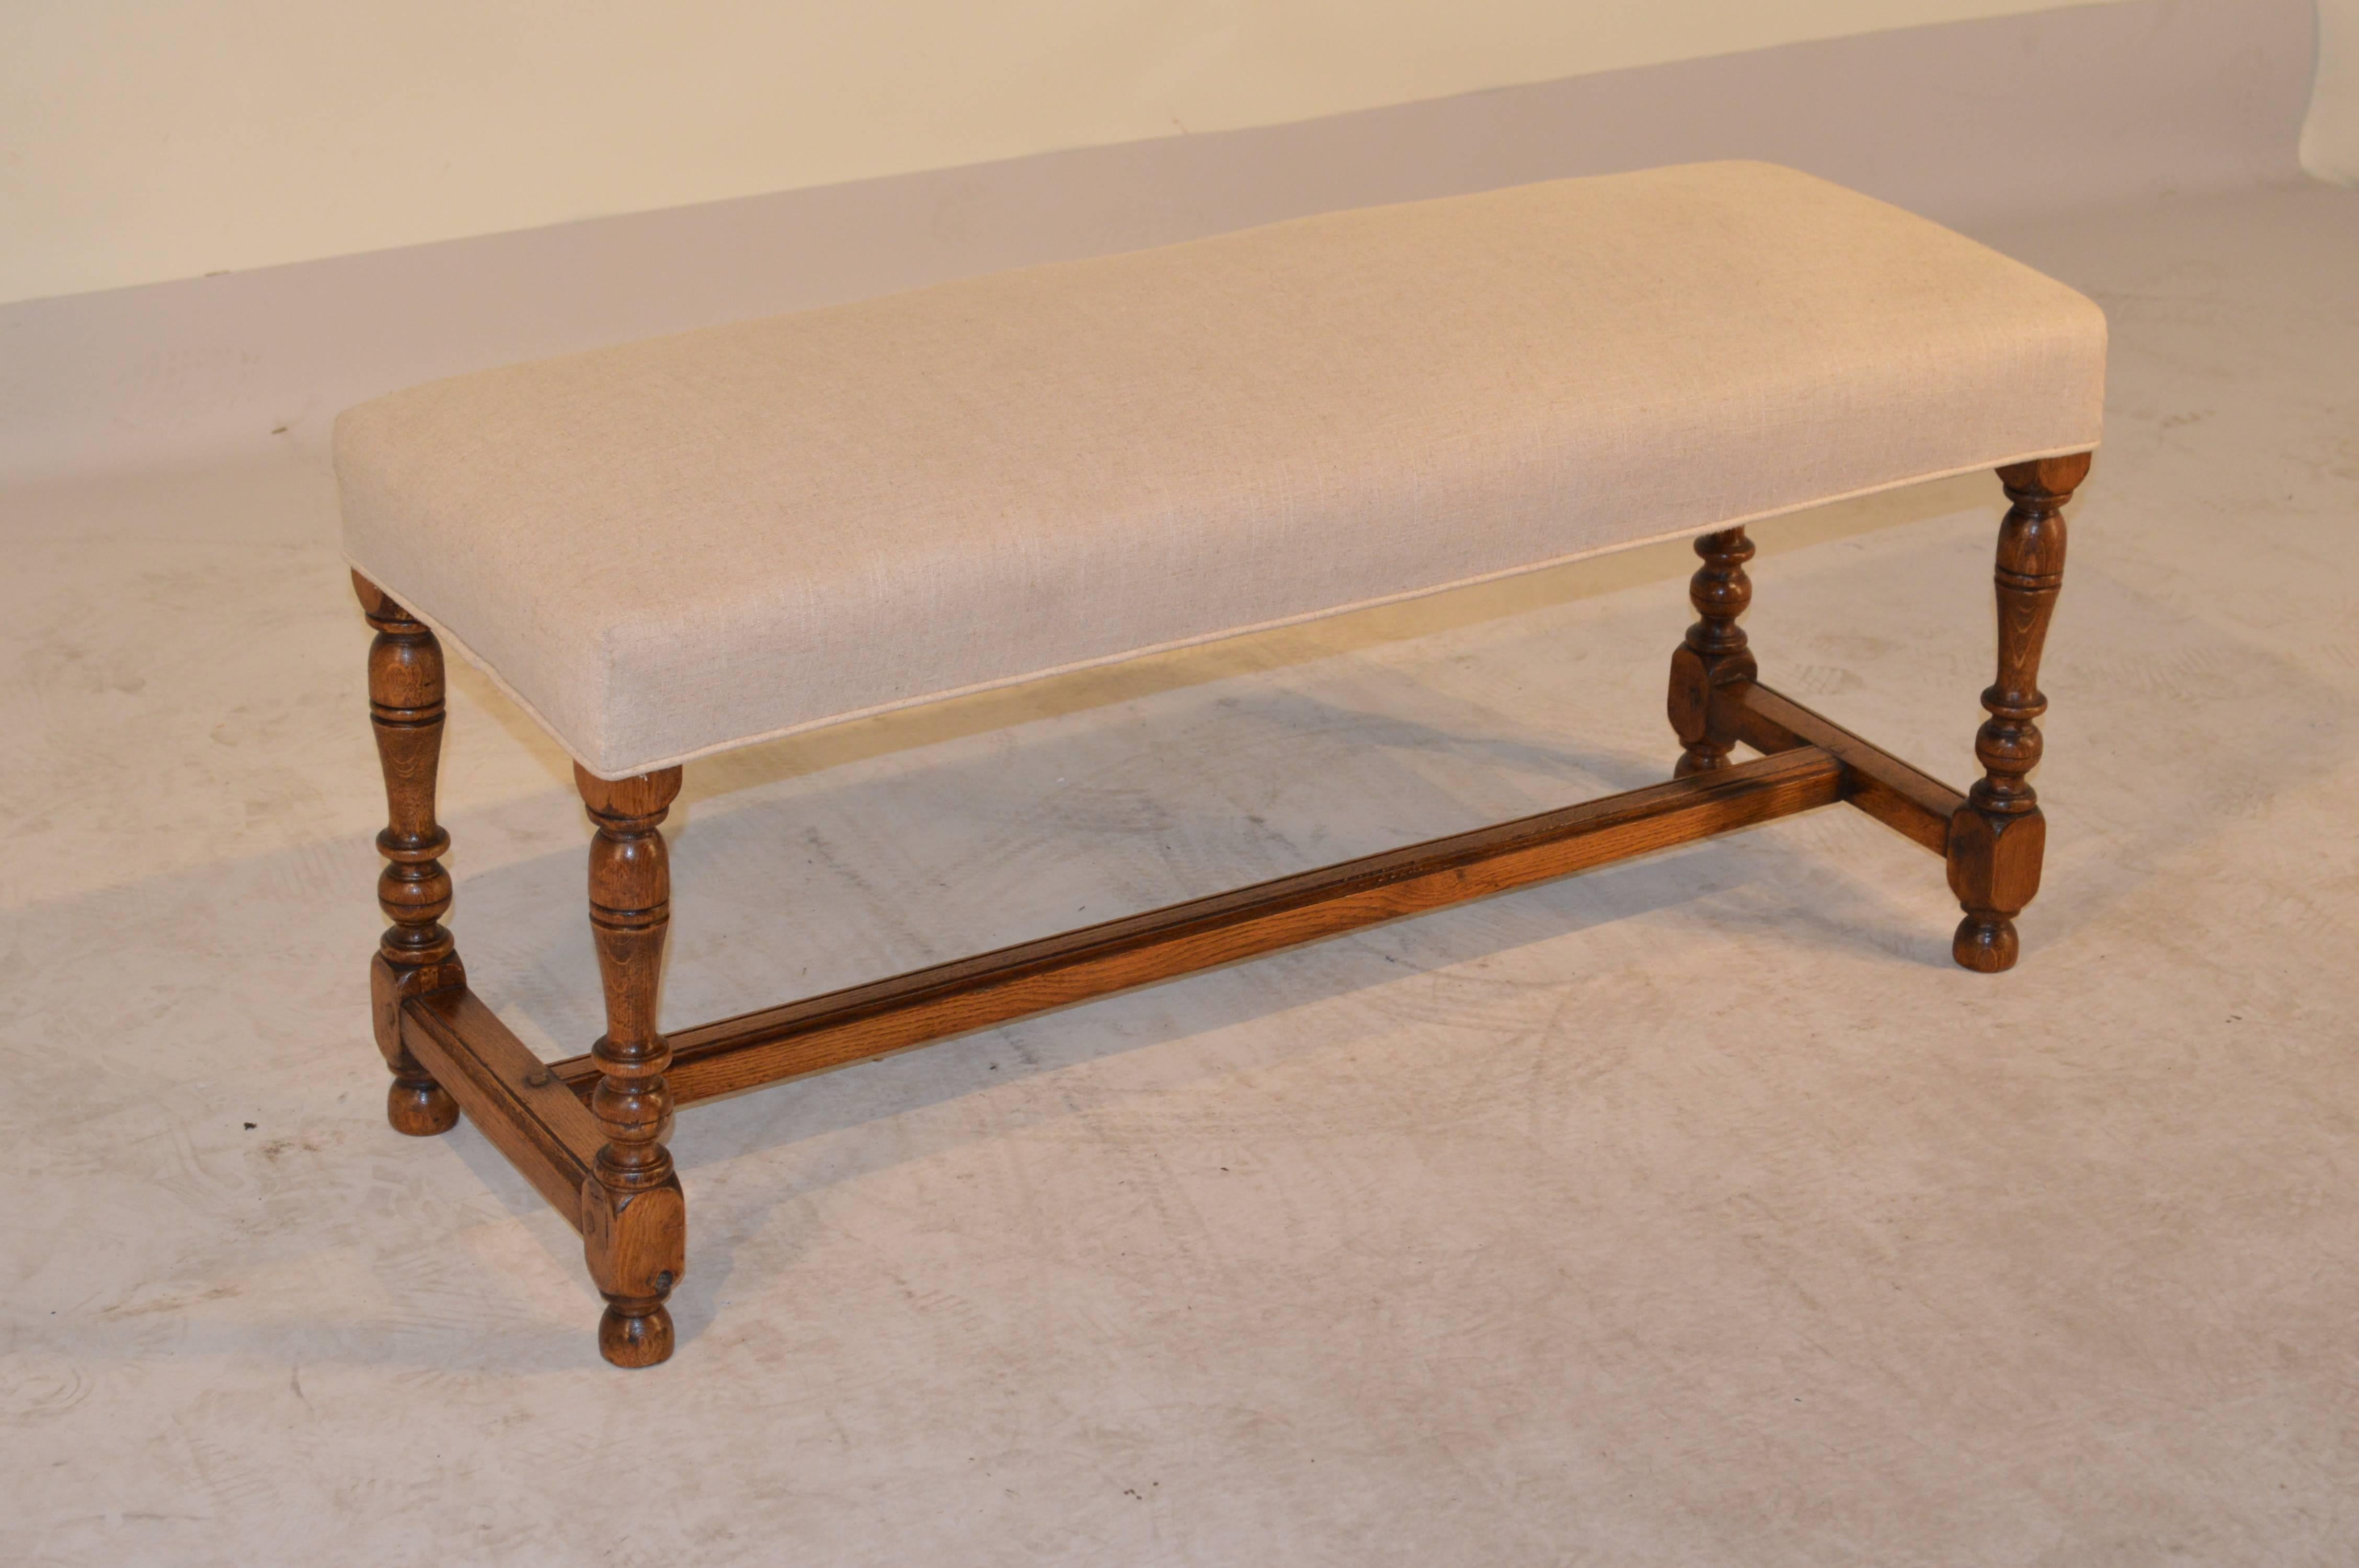 19th century English oak bench with hand-turned legs, joined by simple stretchers and cross stretcher, and raised on turned feet. The seat has been newly upholstered in linen and finished with single welt decoration.